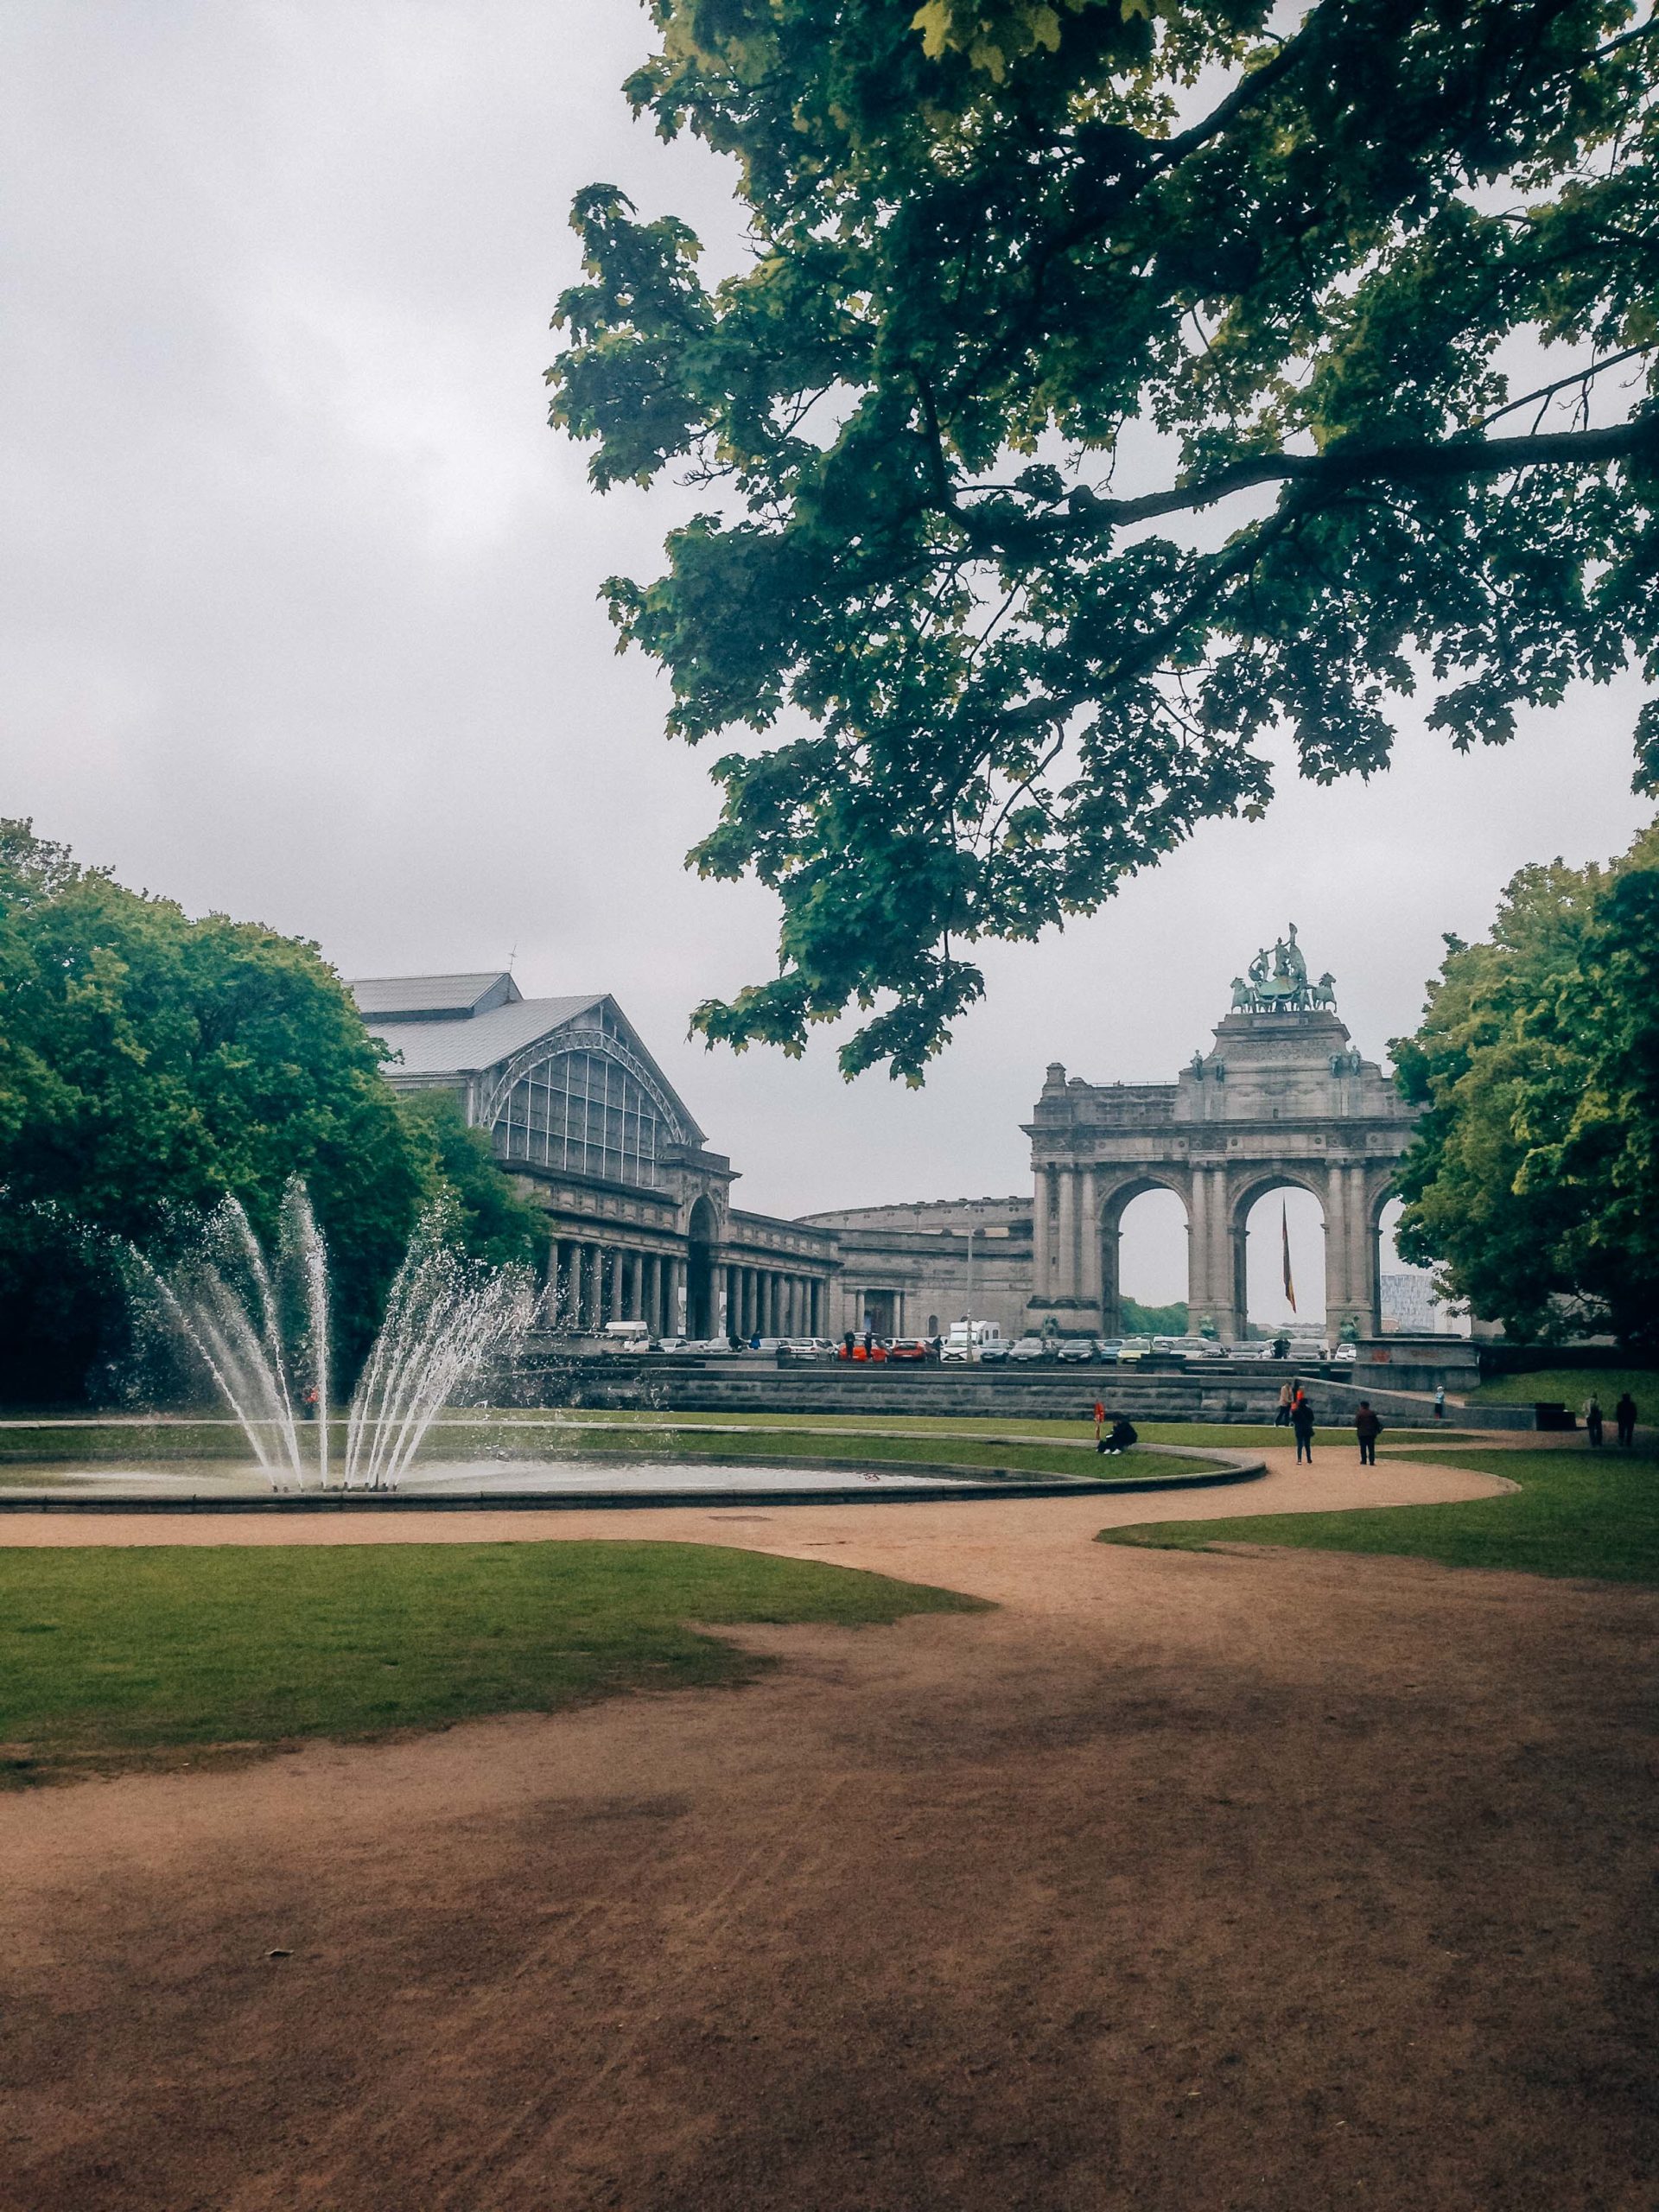 Visit the Cinquantenaire during your weekend in Brussels